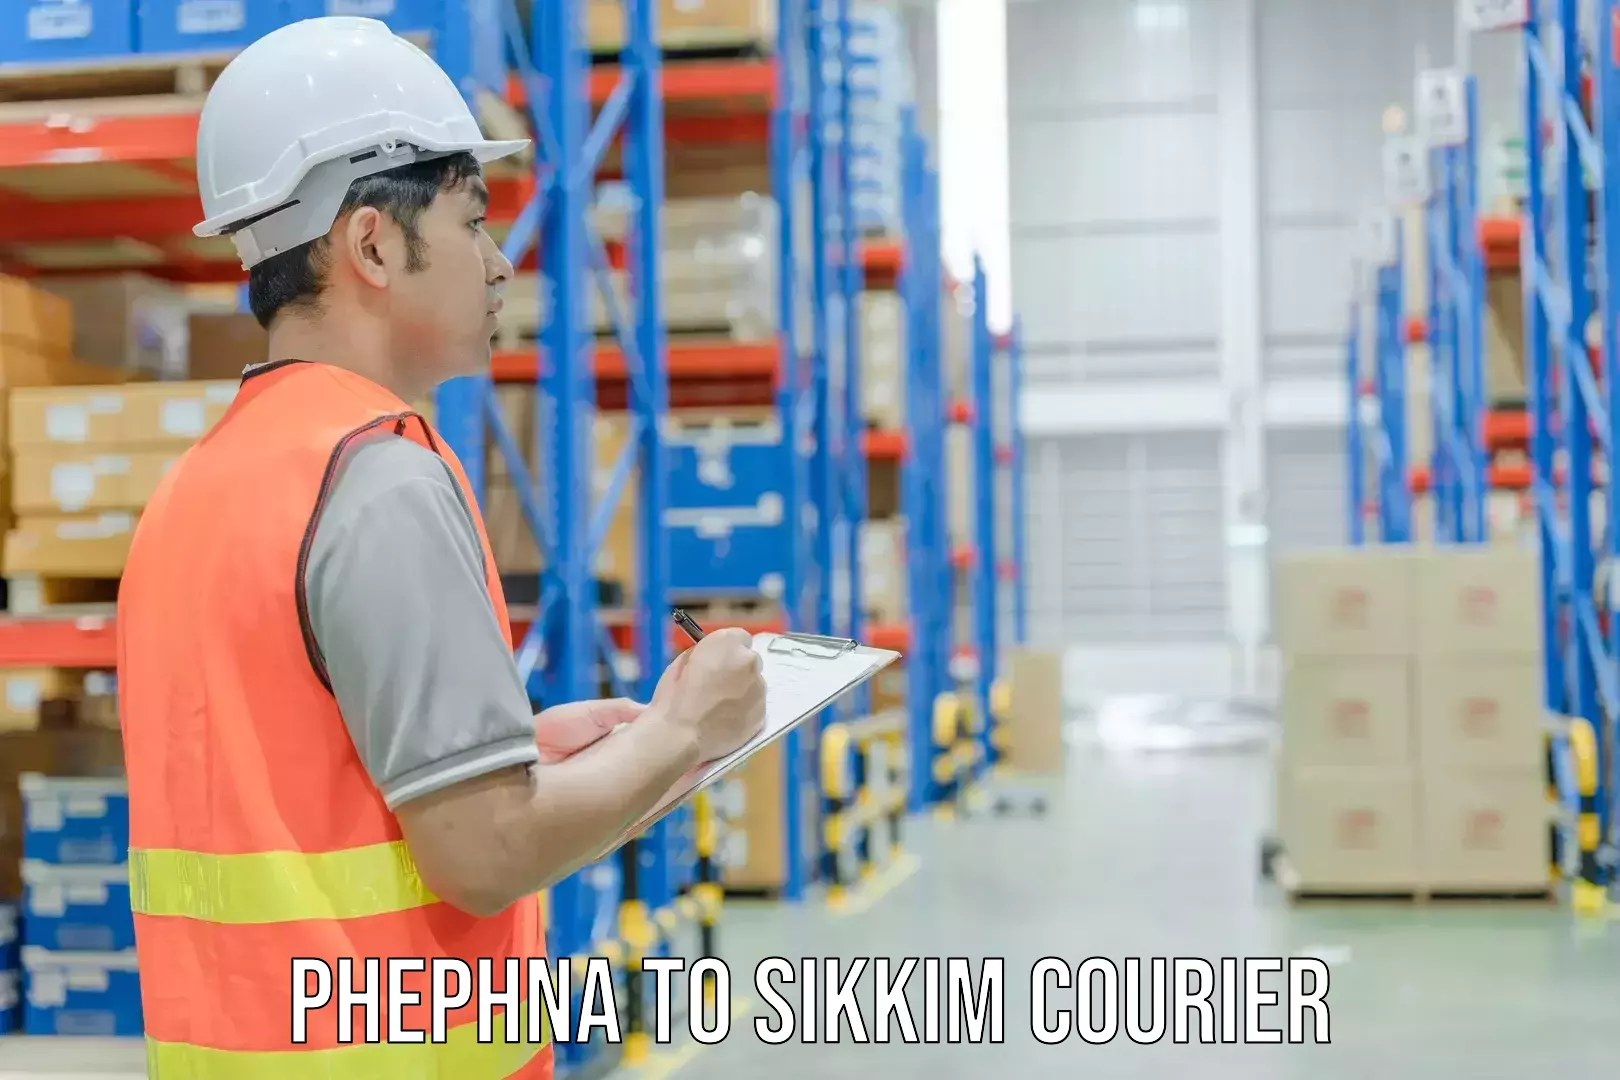 International courier networks Phephna to Sikkim